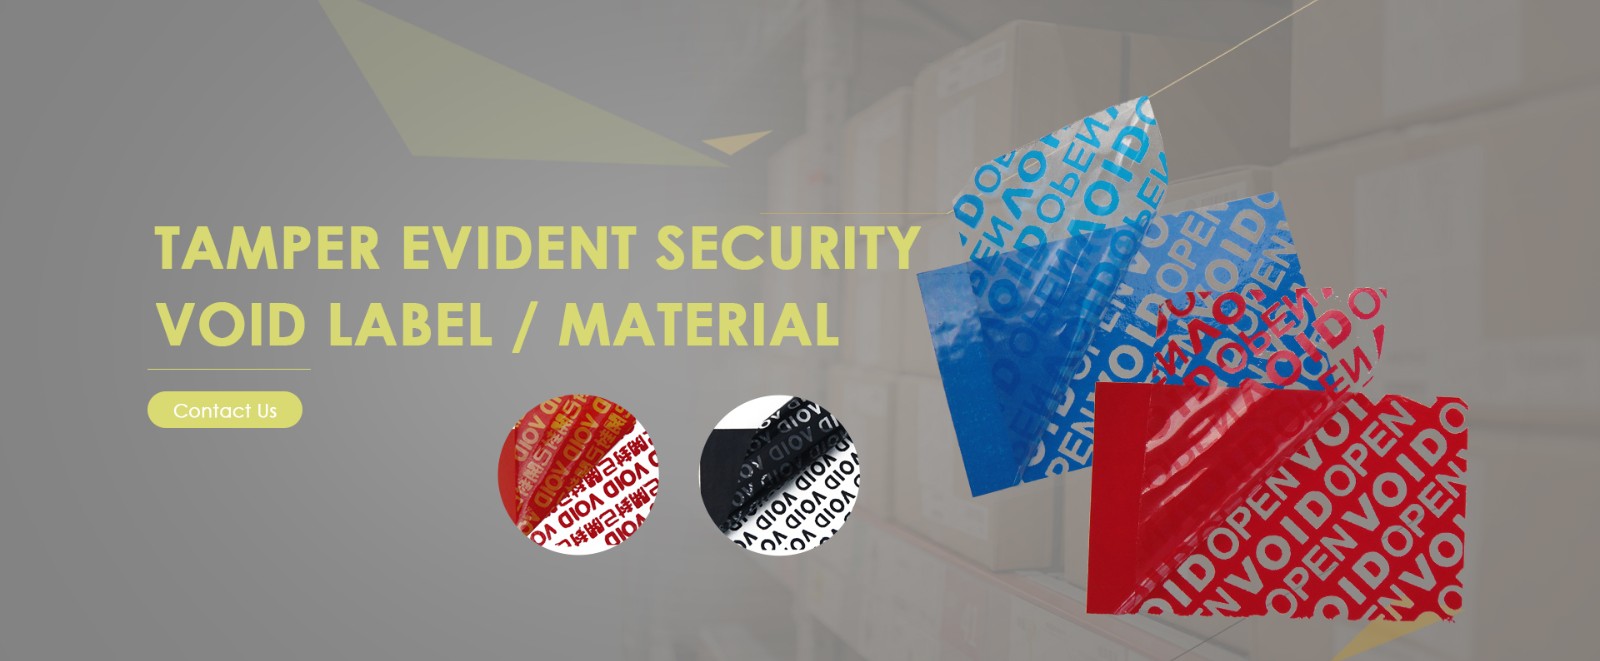 Application and function of Tamper Evident Security label and tape